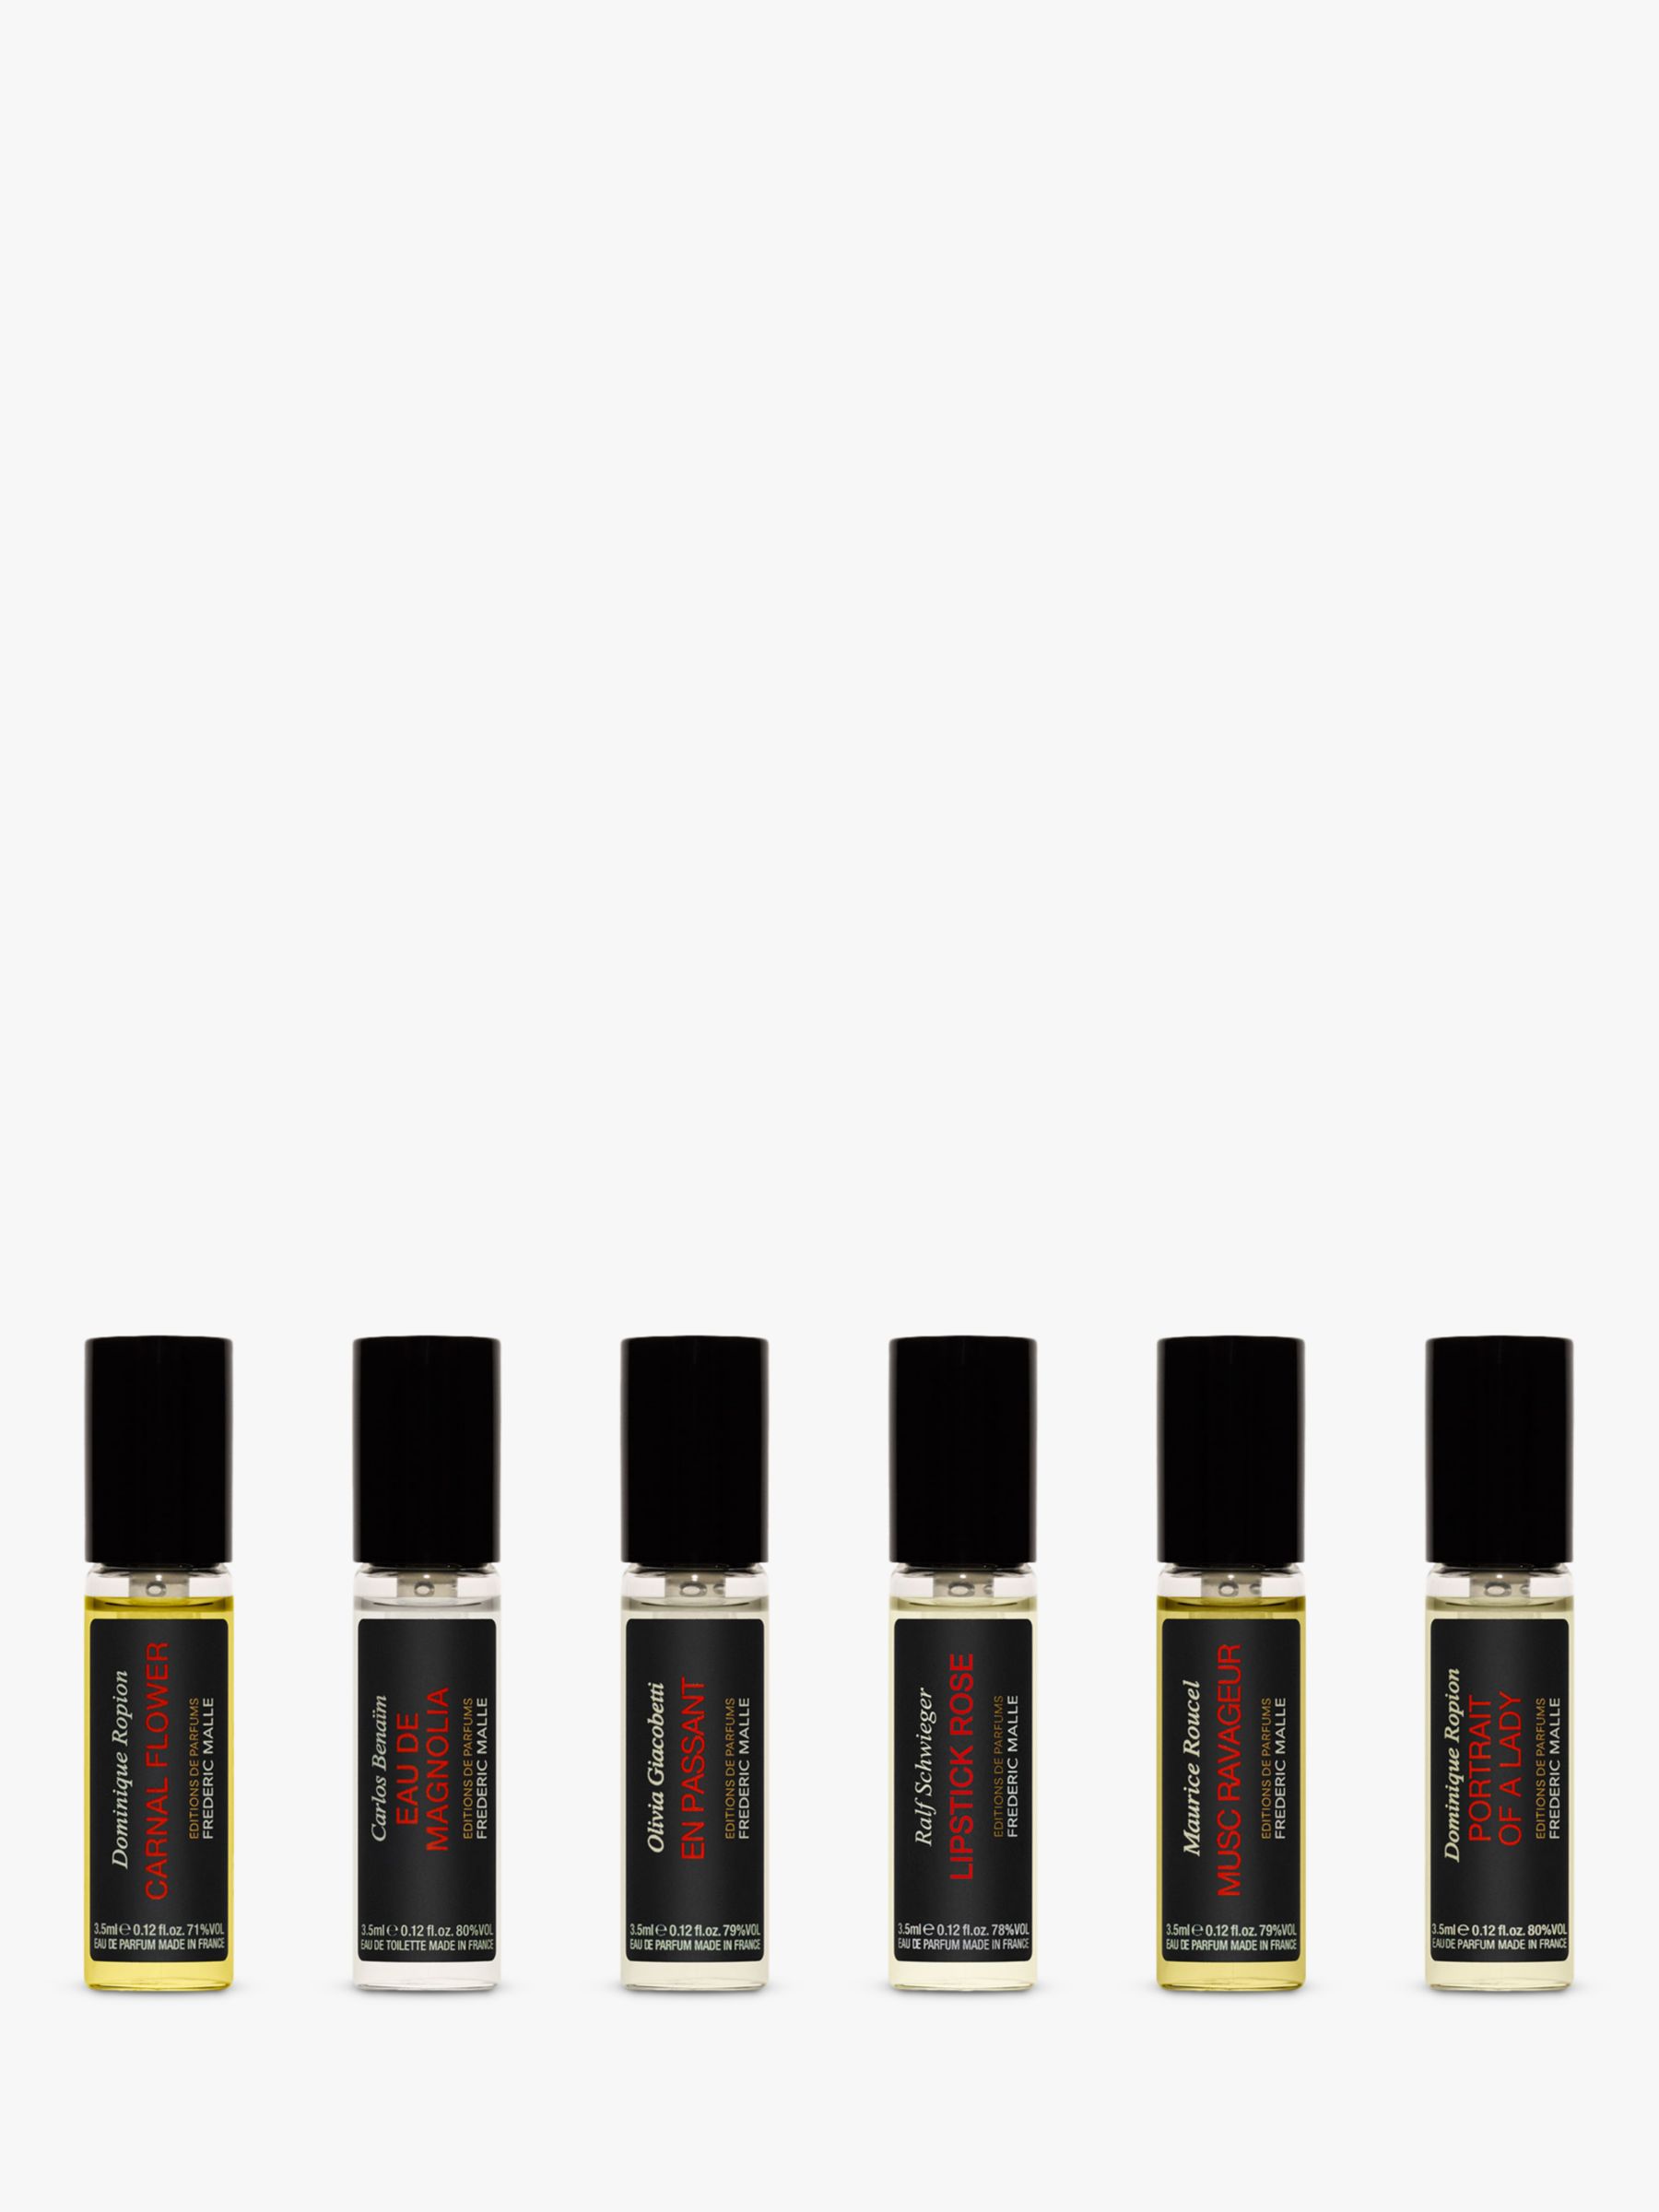 Frederic Malle The Essentials Collection Fragrance Gift Set